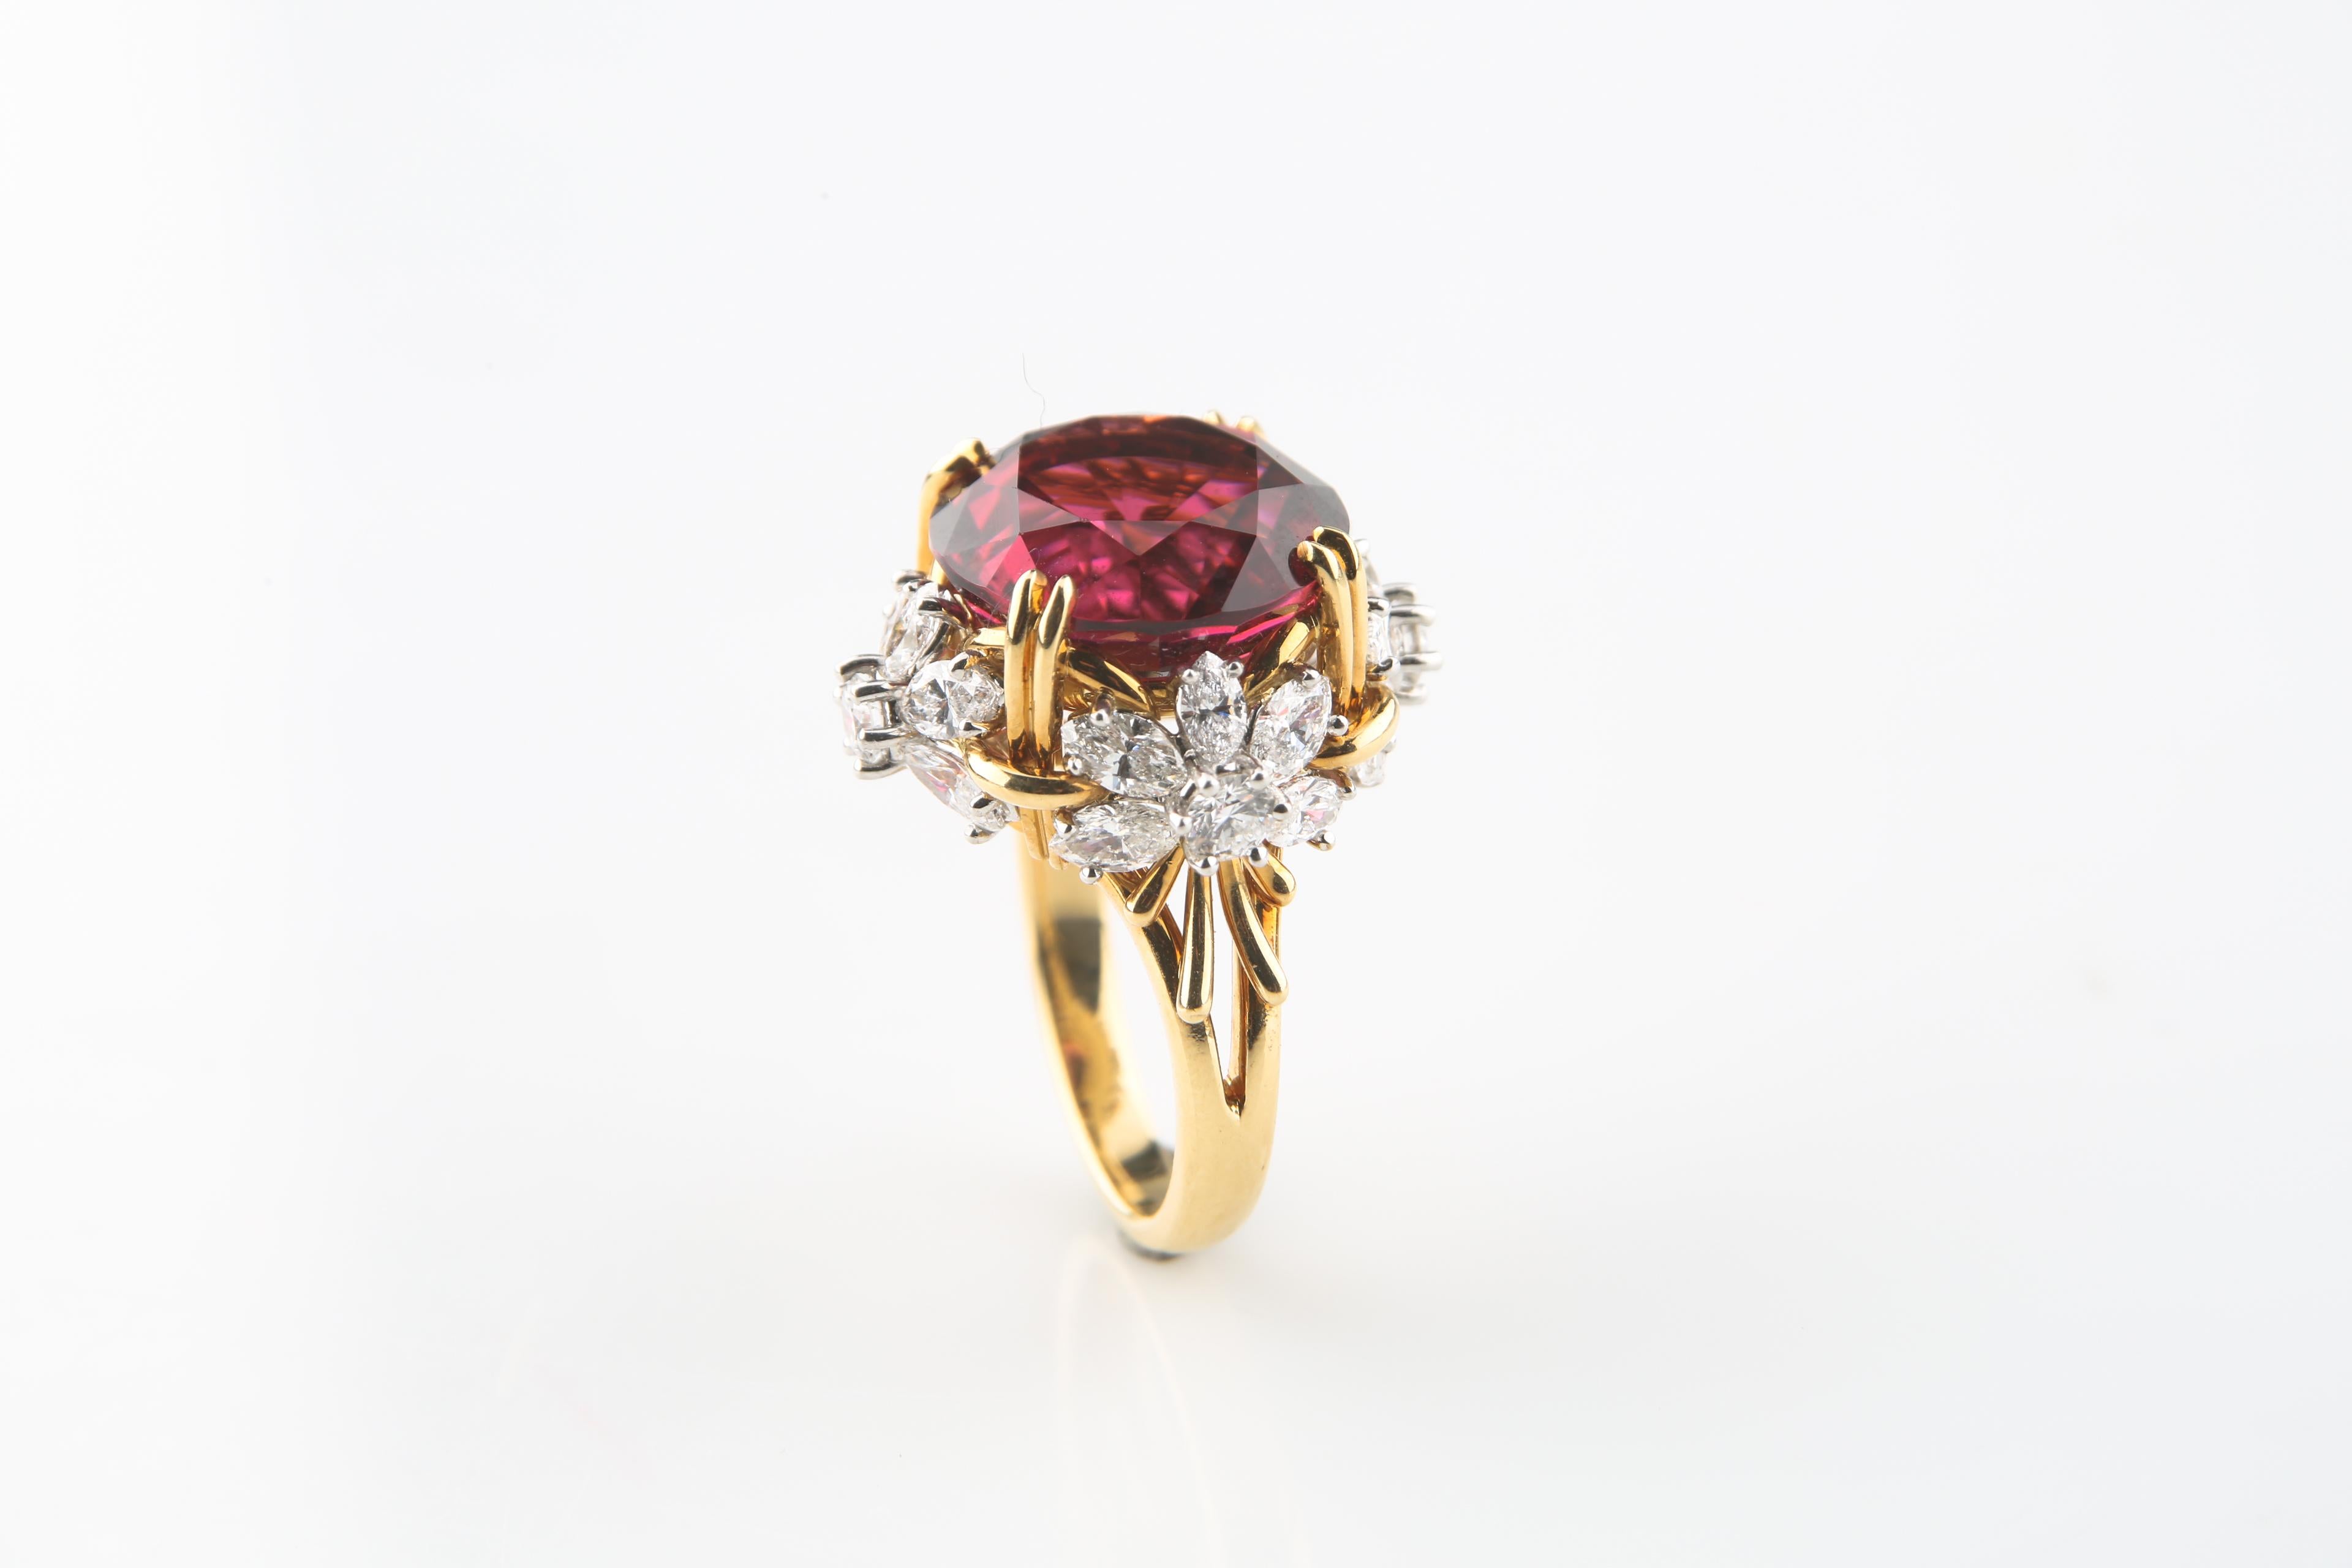 Beautiful 18k Yellow Gold & .950 Platinum Cocktail Ring
Features a Large Brilliant Round Cut Pink Tourmaline as the Center Stone
Tourmaline is Accented by Four Floral Diamond Clusters at Cardinal Directions
Each Feature Five Marquis-Cut Diamonds